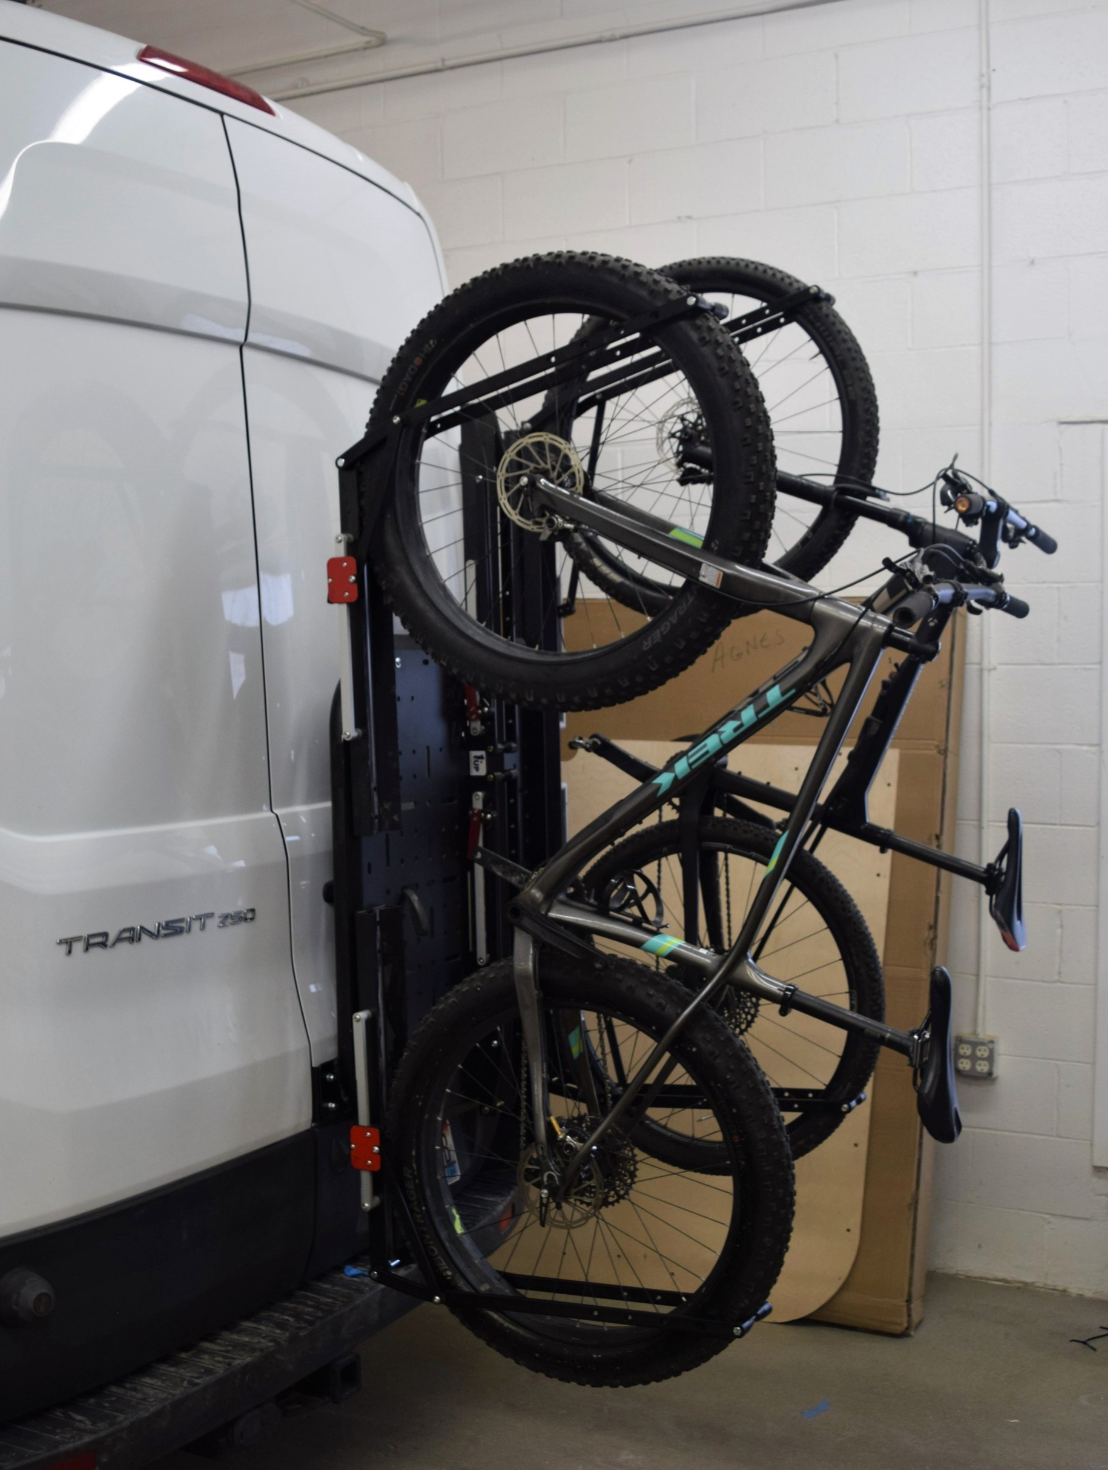 Tire Carrier and Accessory Rack Combo (Ford Transit) by Rover Vans